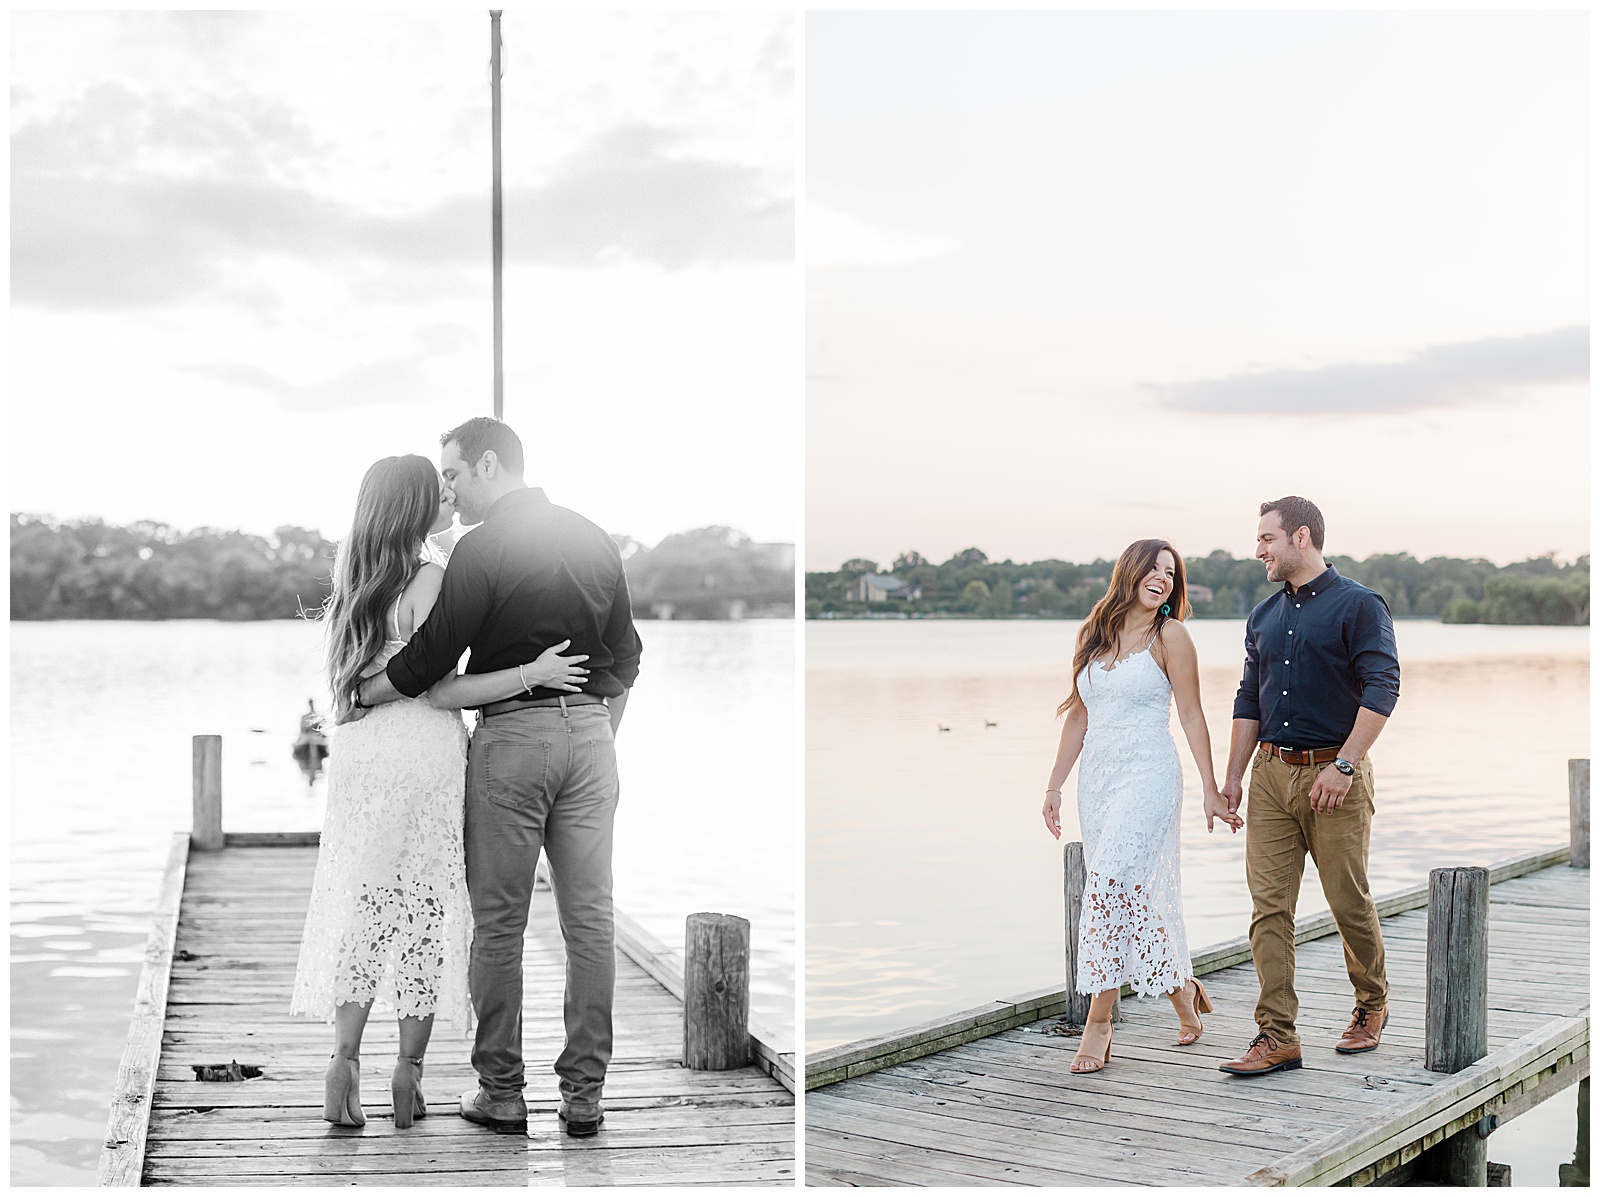 Engagement session in White Rock Lake Dallas